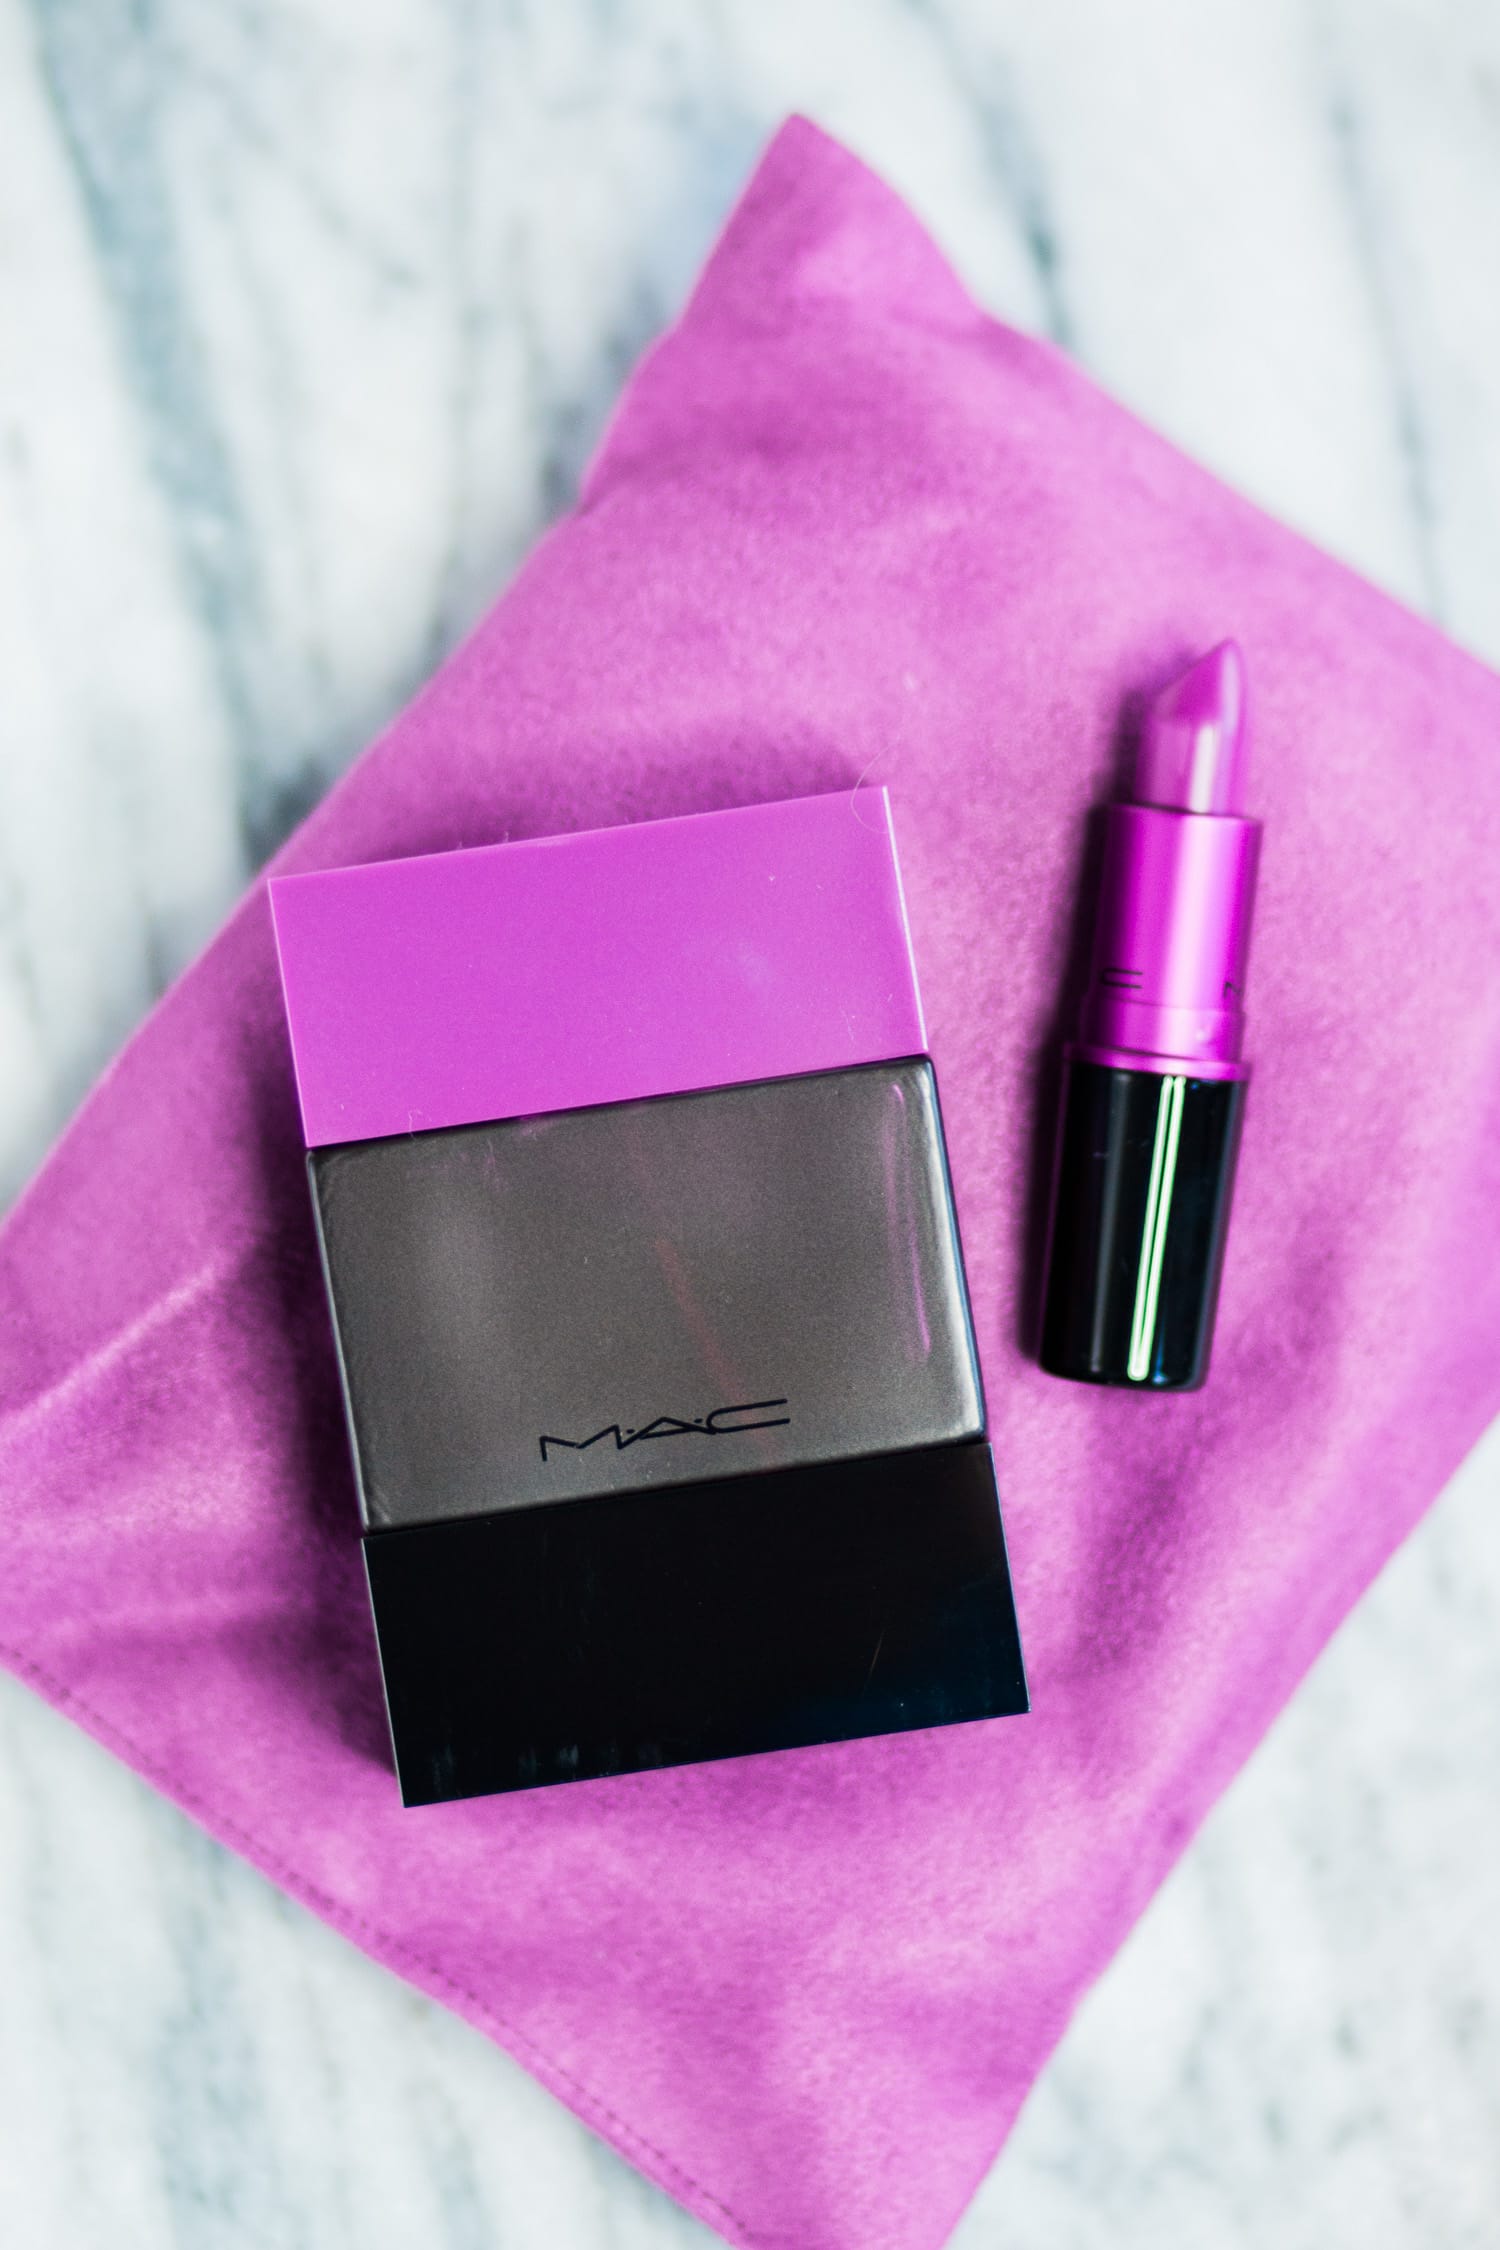 A full review of the MAC Shadescents Heroine perfume and lipstick by Orlando, Florida, beauty blogger Ashley Brooke Nicholas